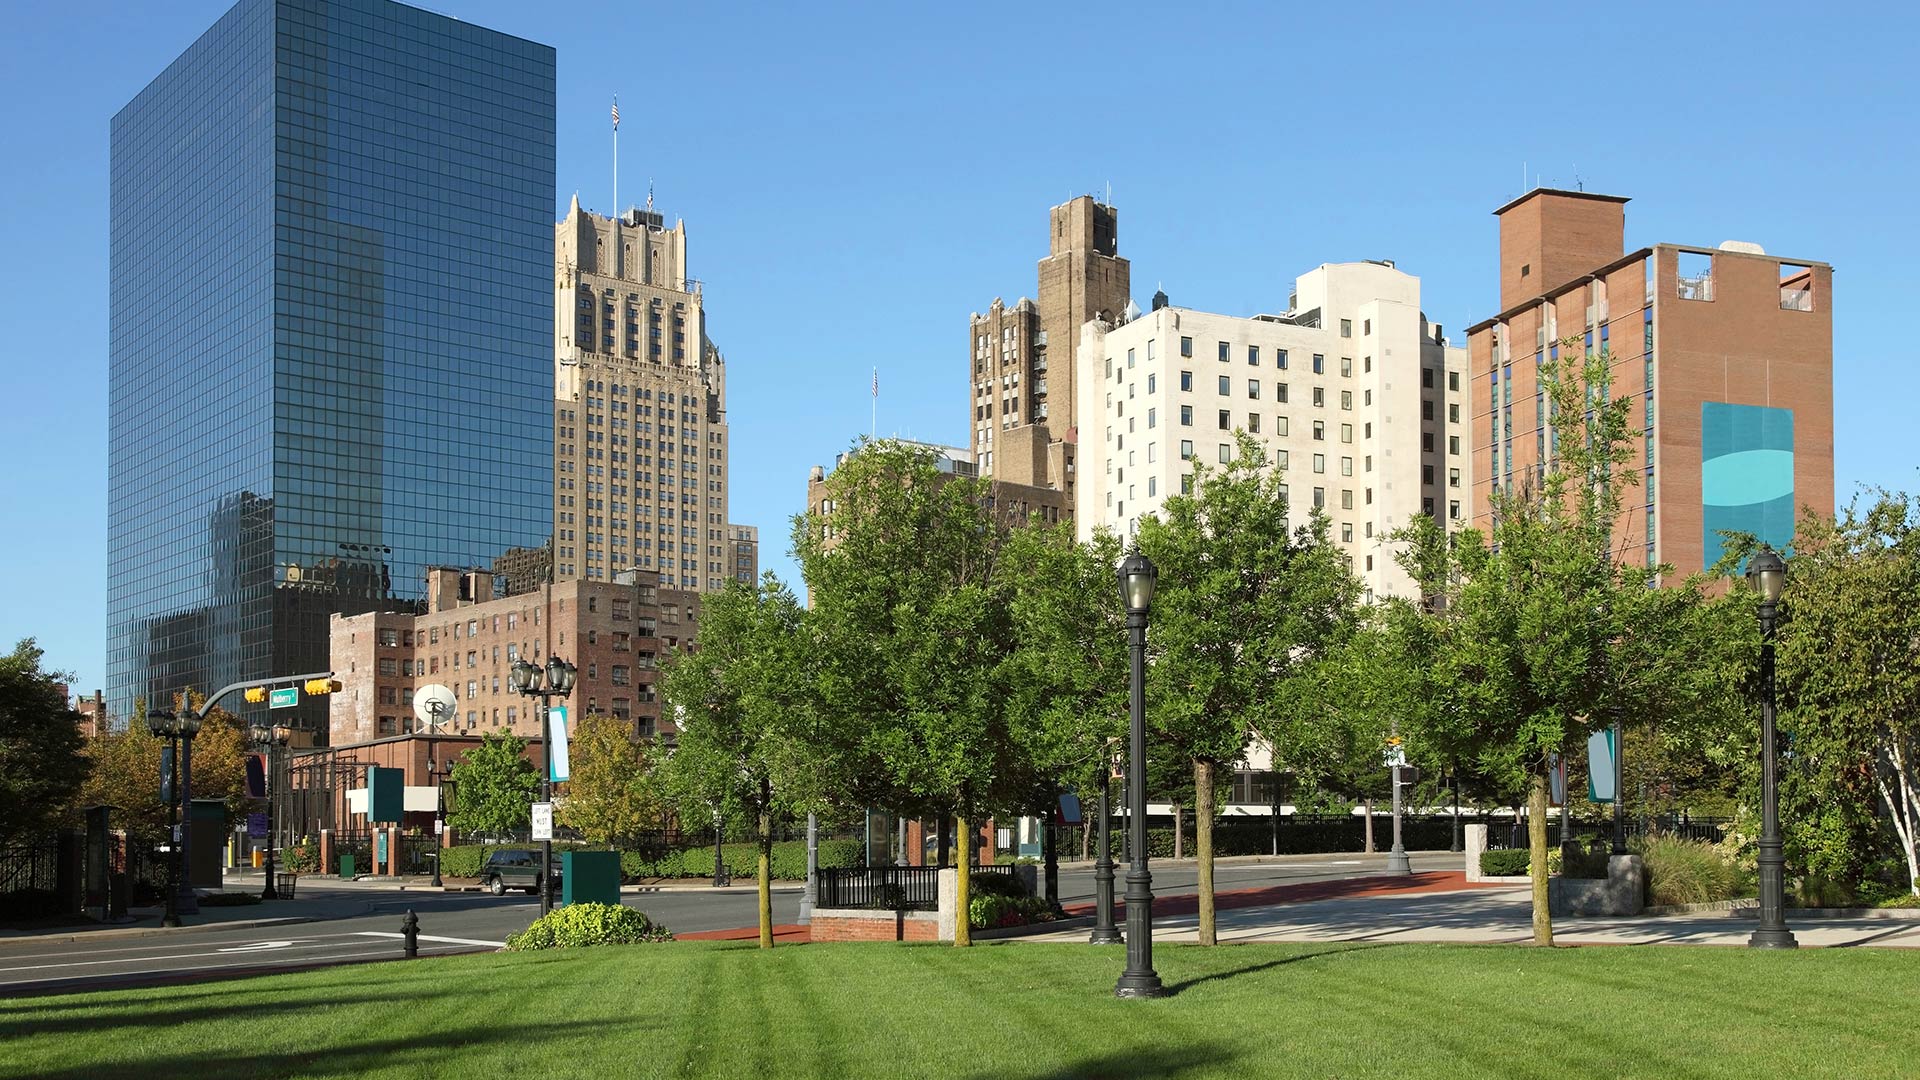 A park and buildings in downtown Newark, New Jersey